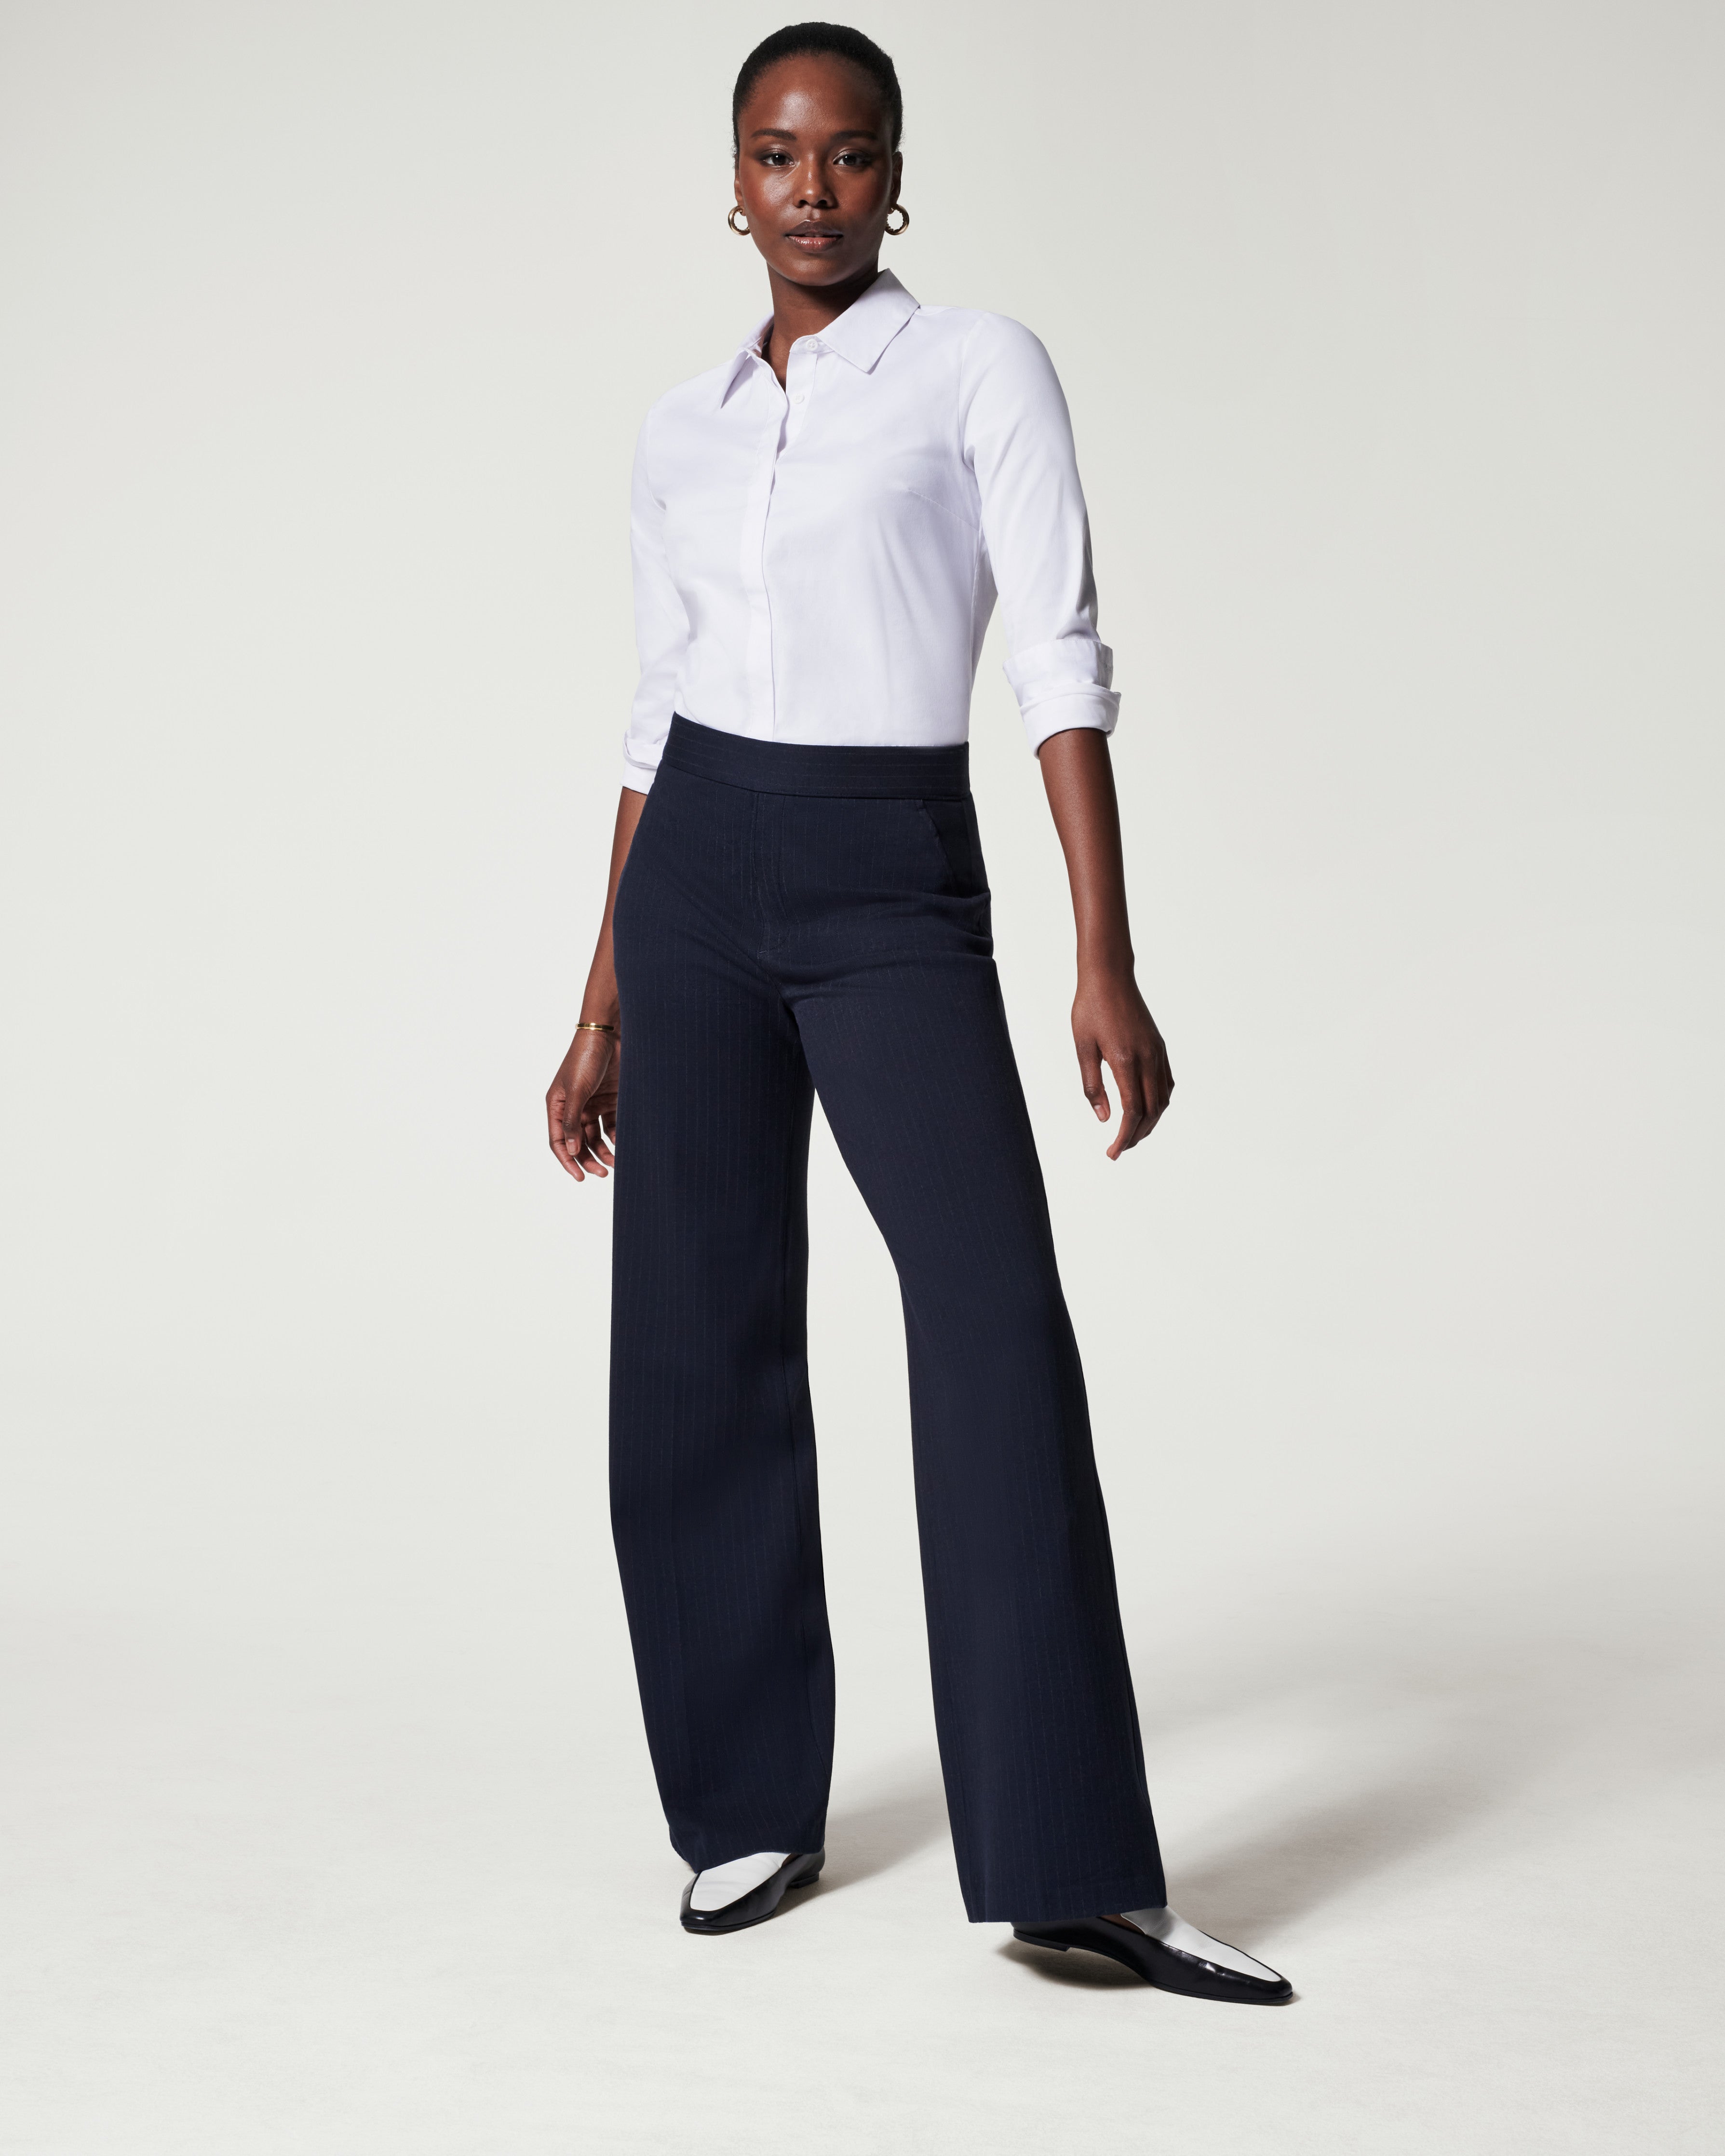 Perfect Pant Wide Leg - Love, Charlie